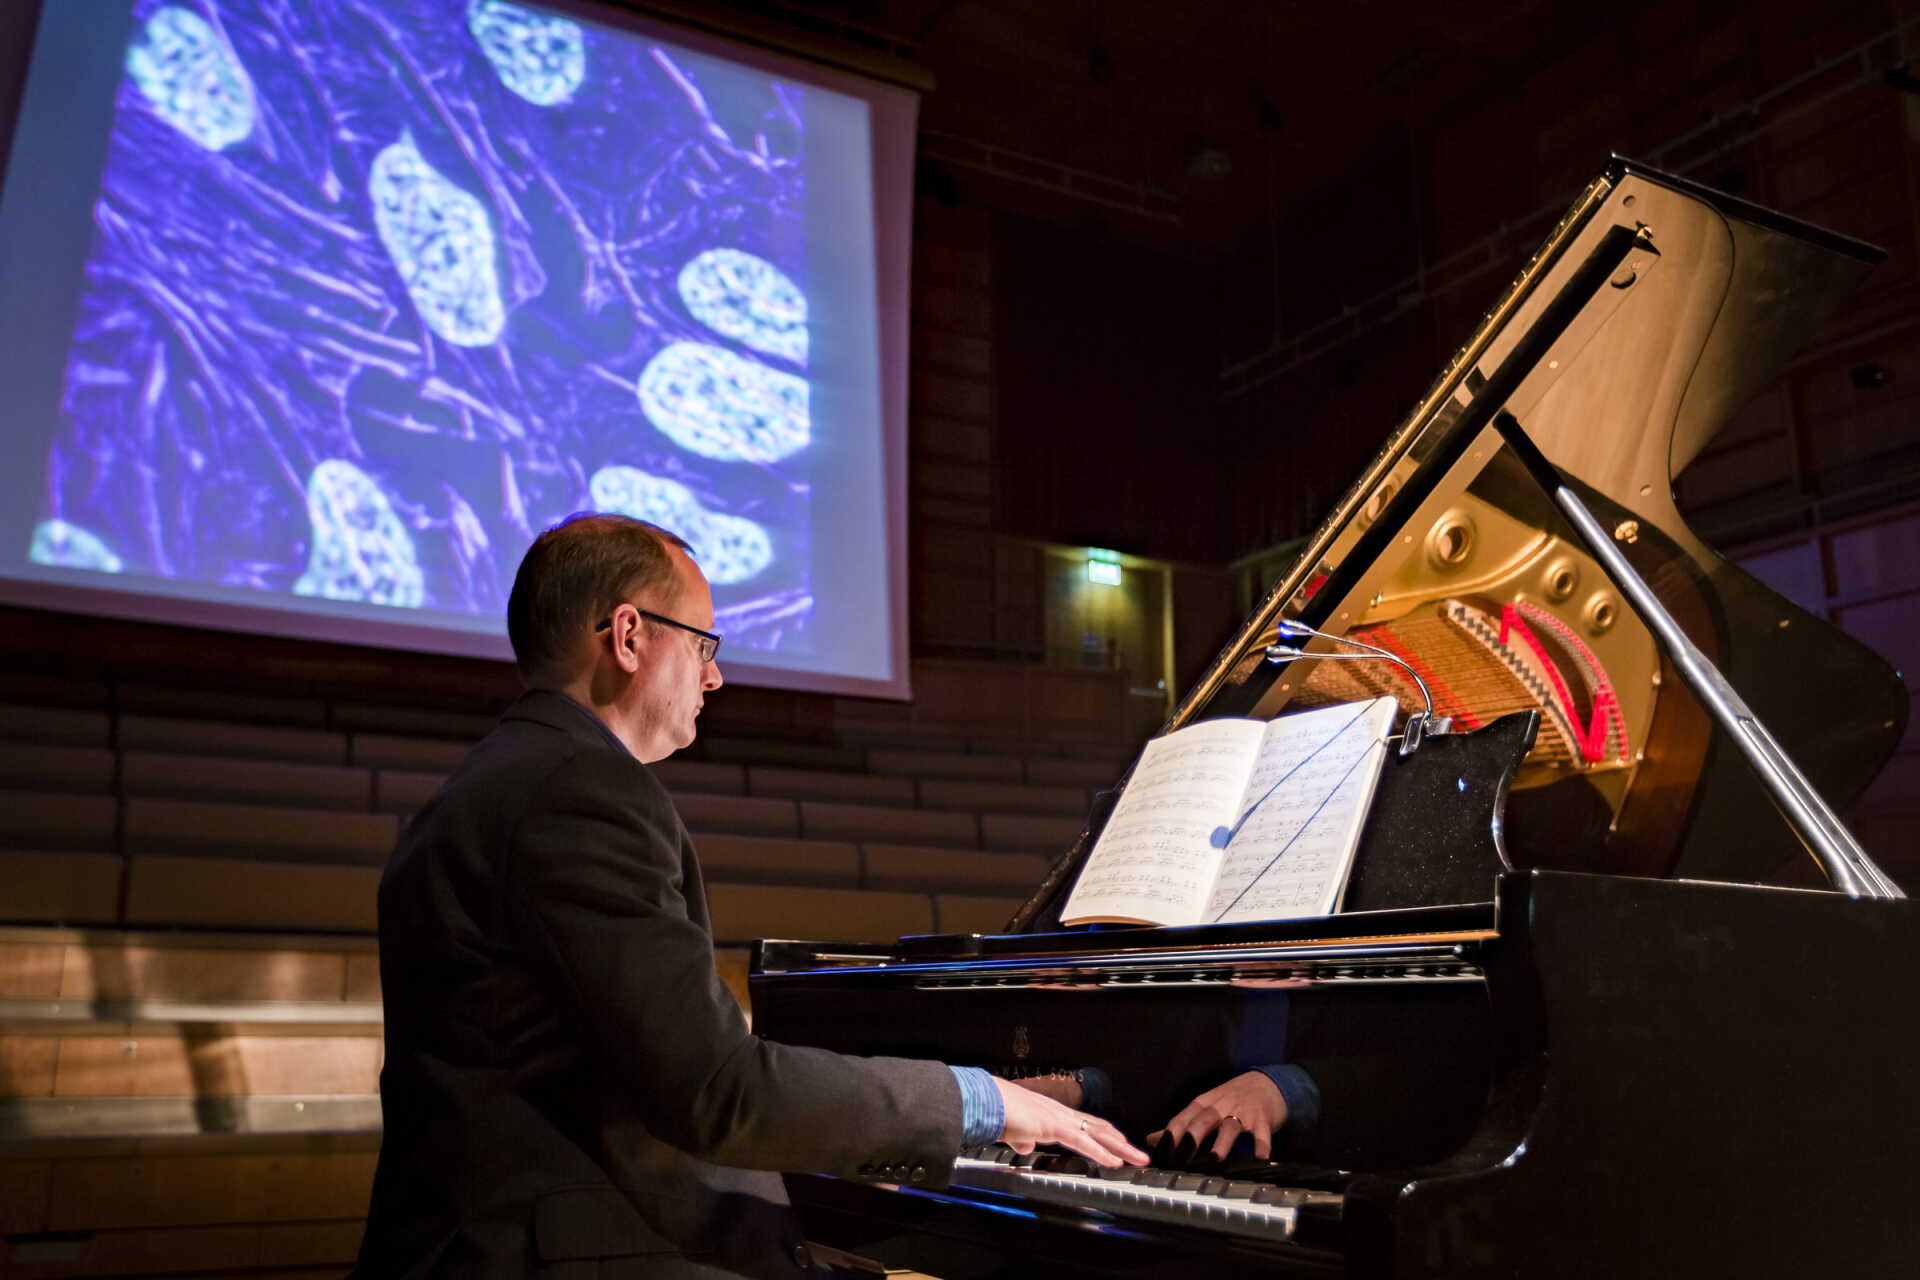 Piano and projections in the concert-hall